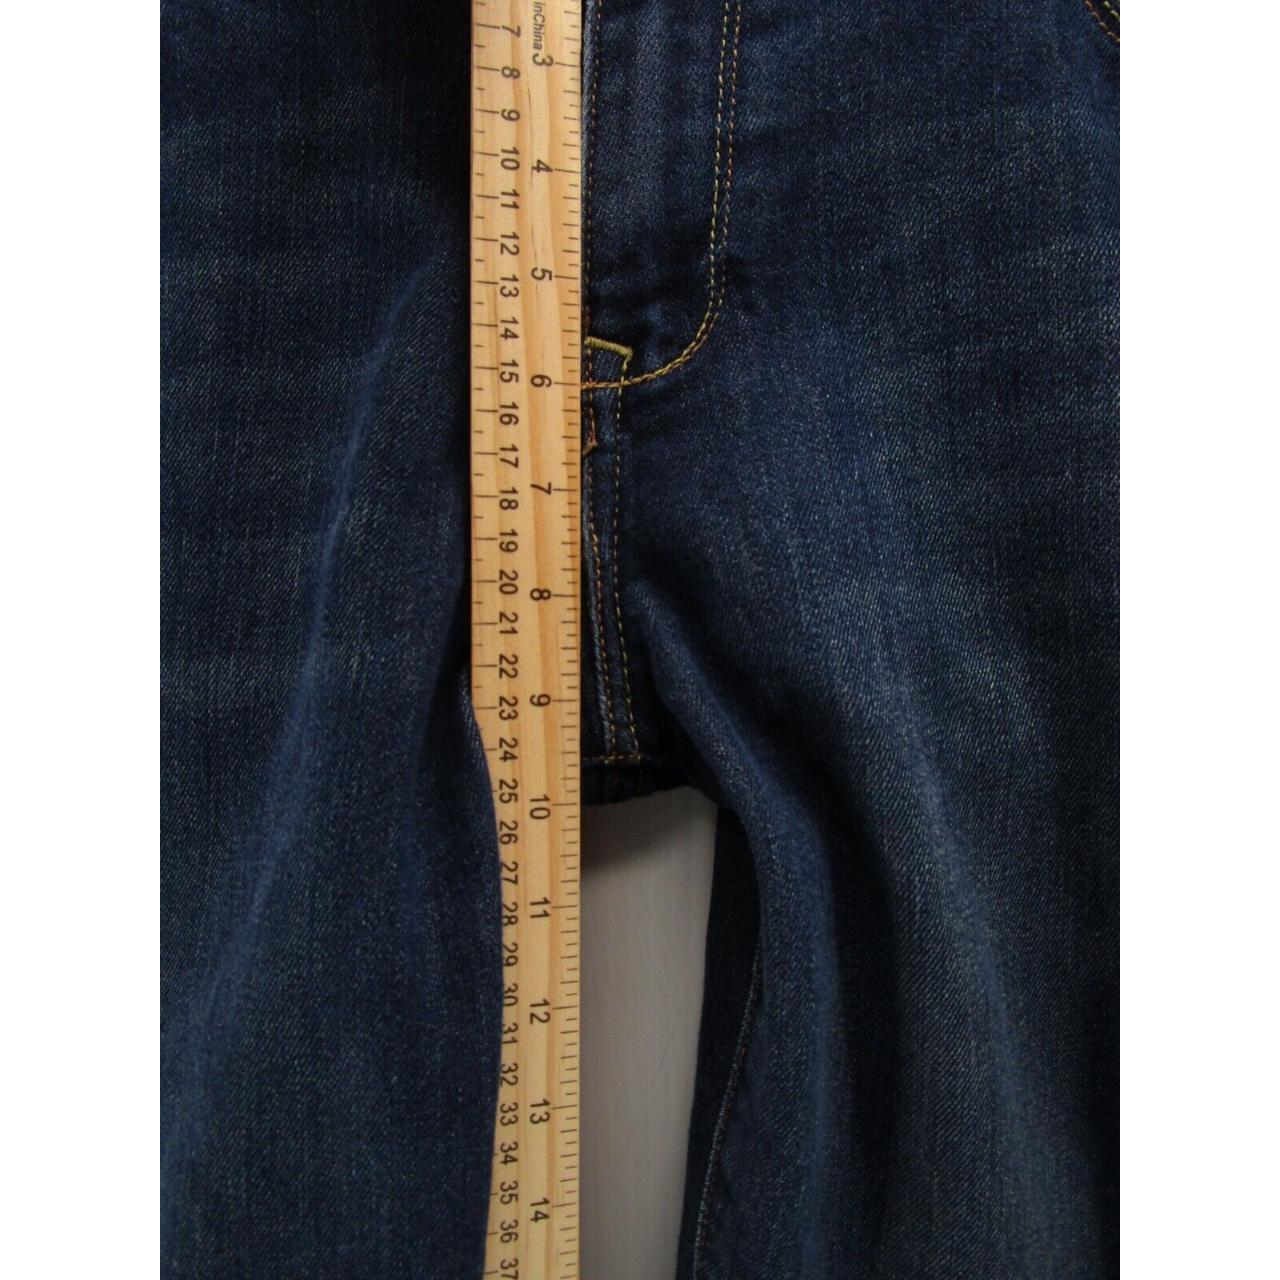 Product Image 3 - Old Navy Jeans Women 14